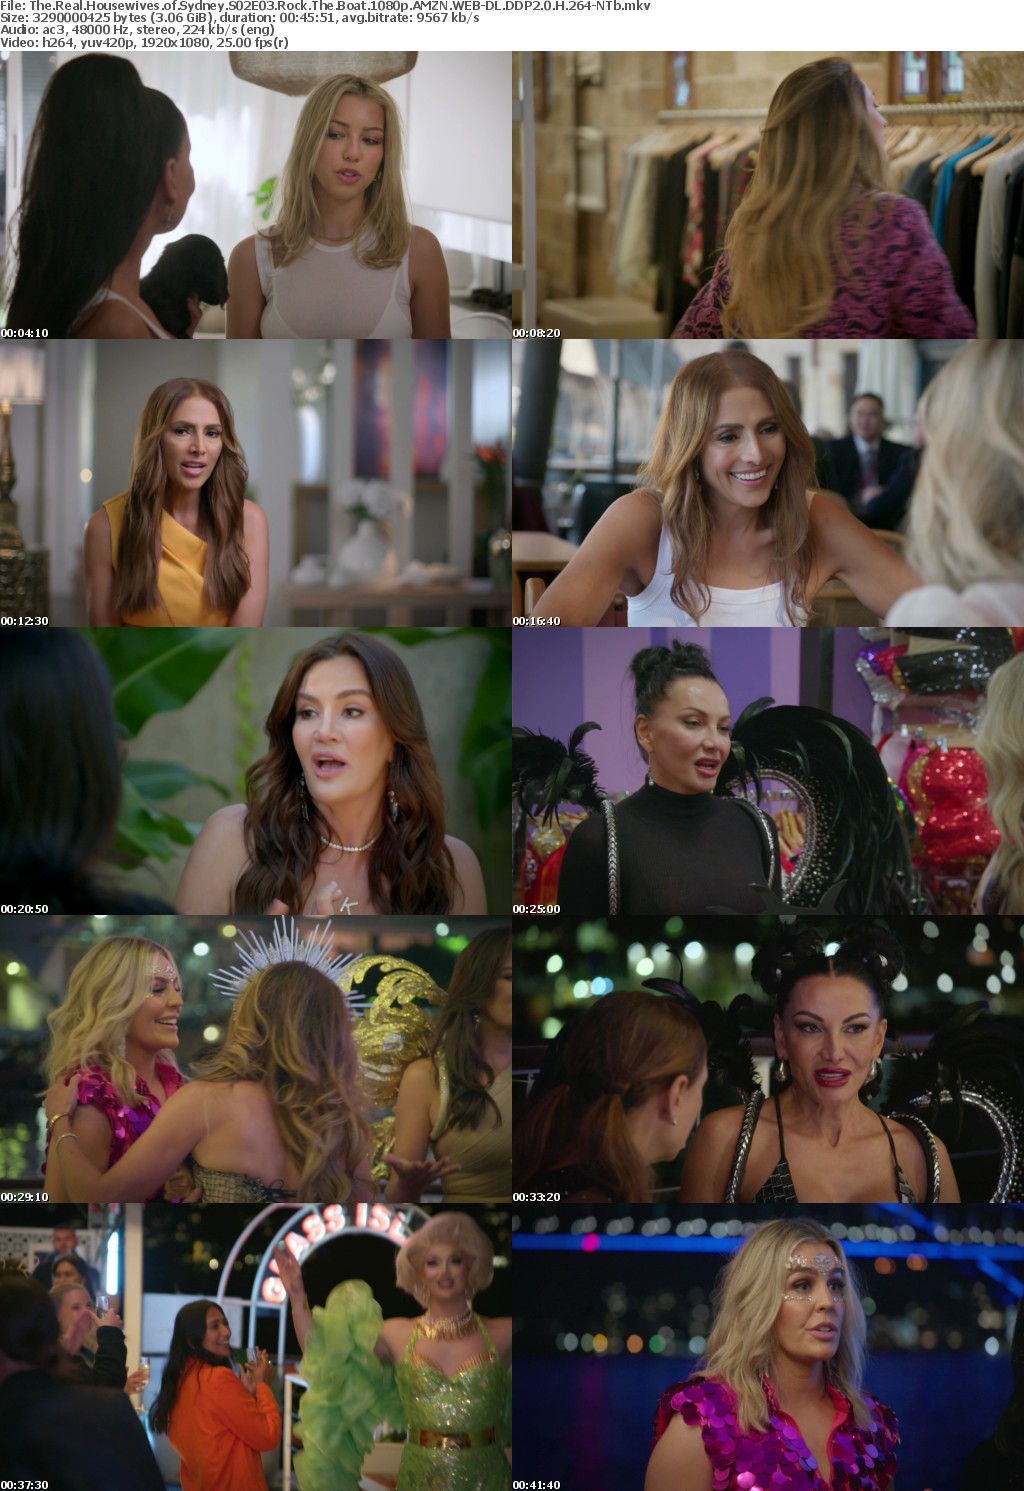 The Real Housewives of Sydney S02E03 Rock The Boat 1080p AMZN WEB-DL DDP2 0 H 264-NTb